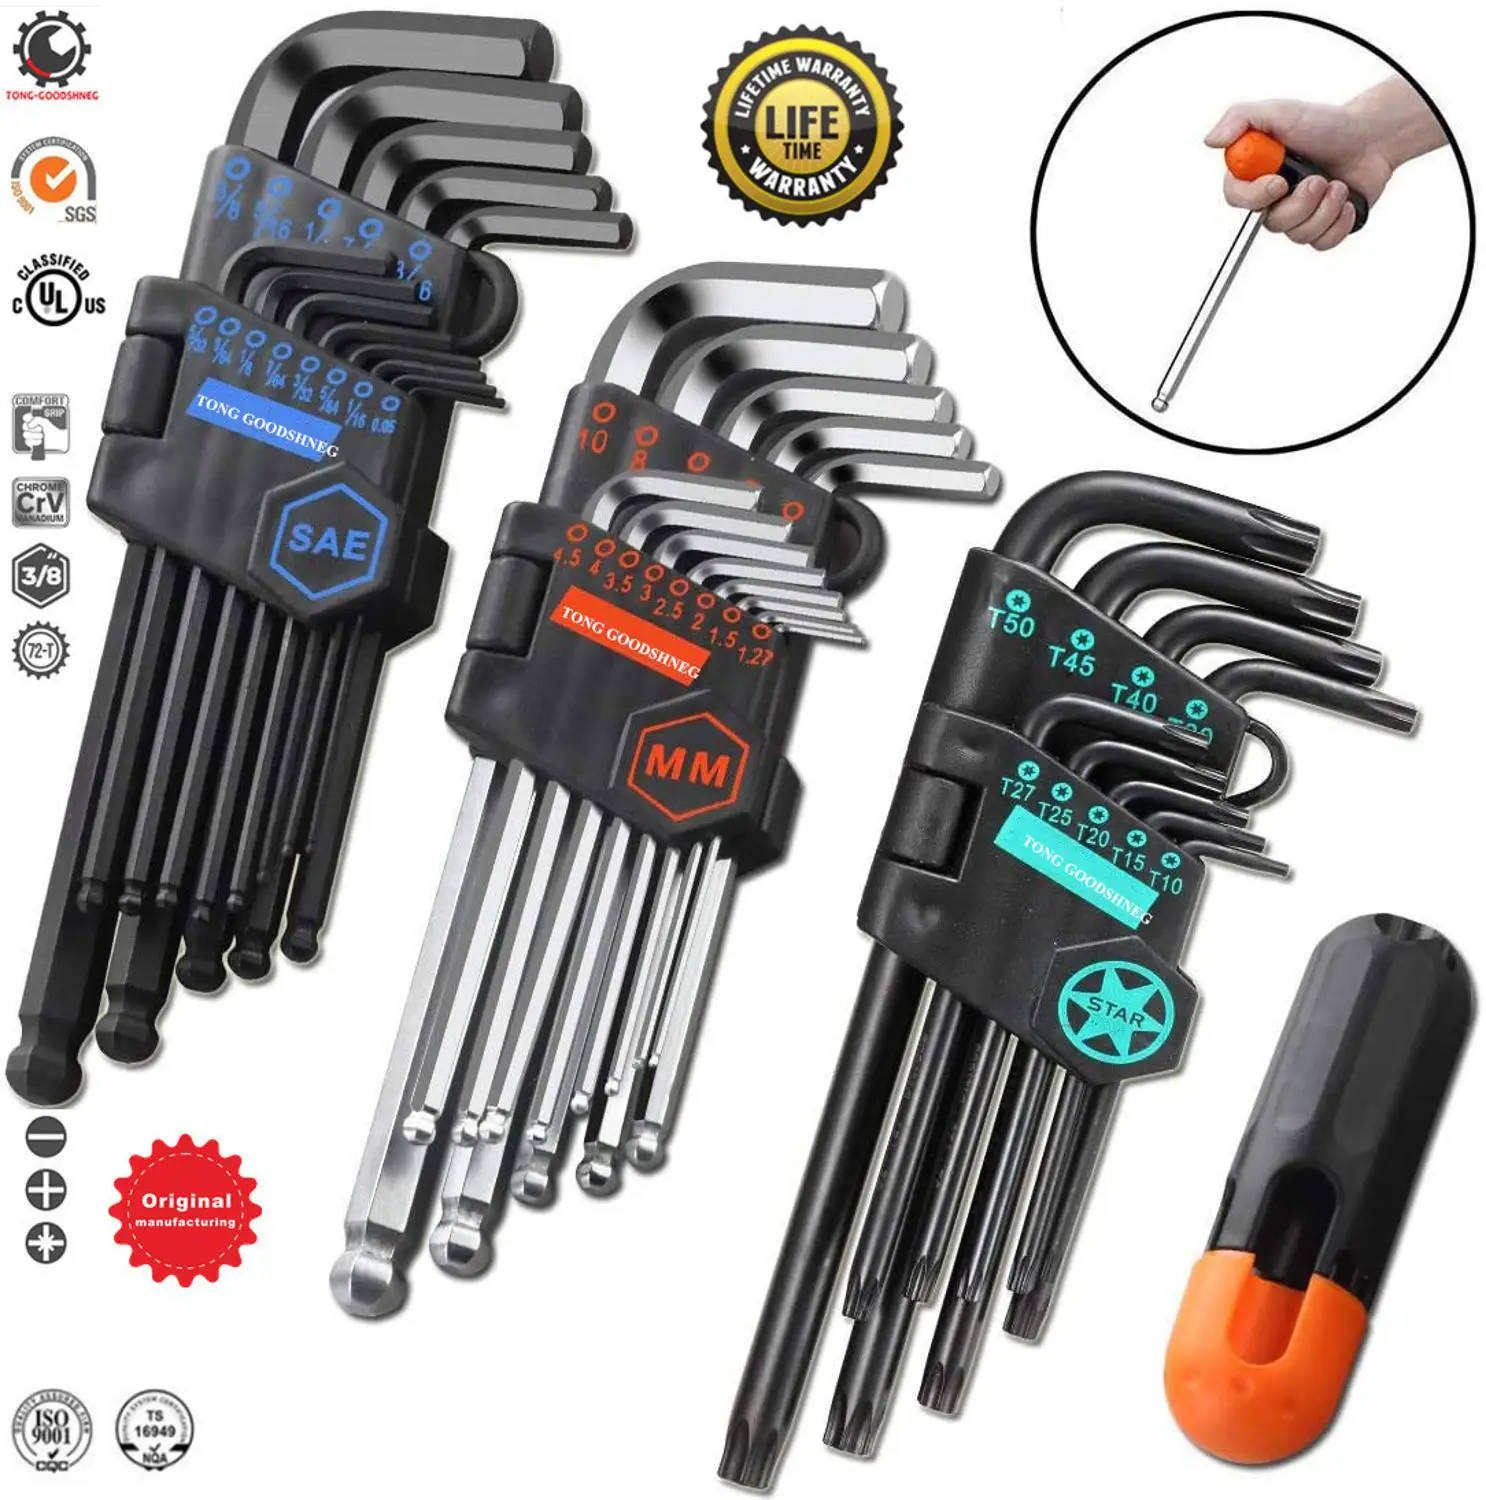 T Handle Torx Screwdriver Set Metric Hex Allen Key Star Tool Double Ended Ball 